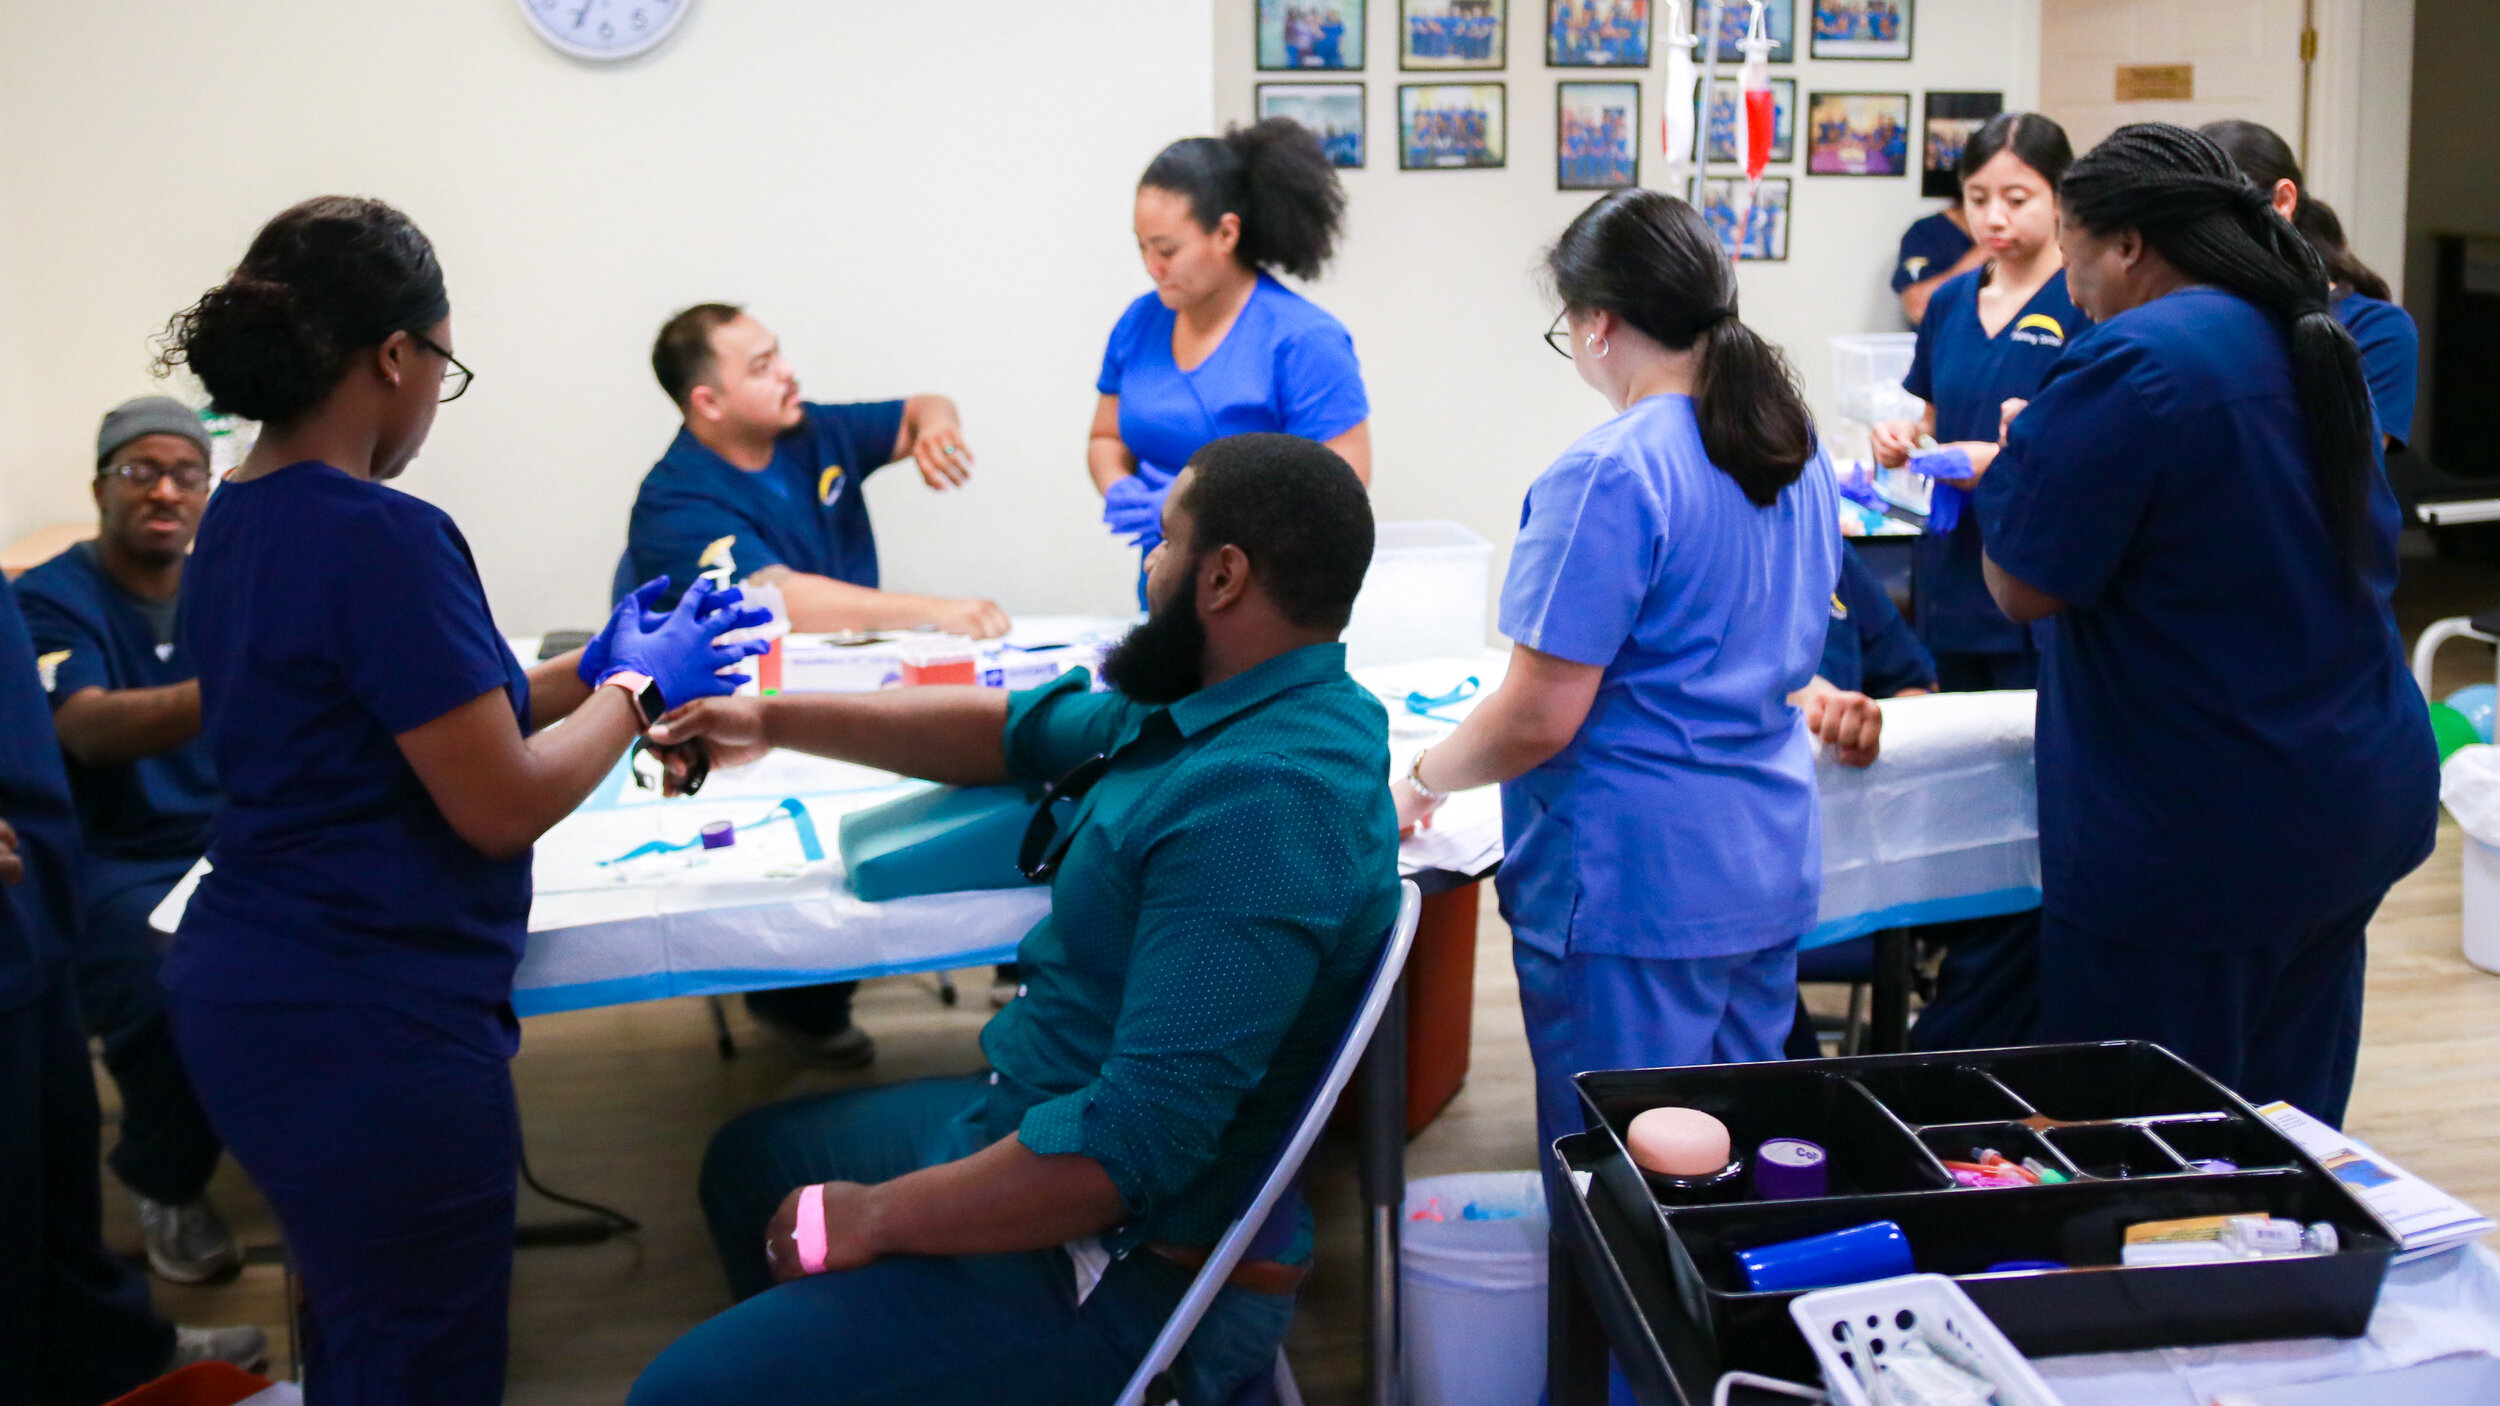 Phlebotomy Students at the Training Center of Central Texas